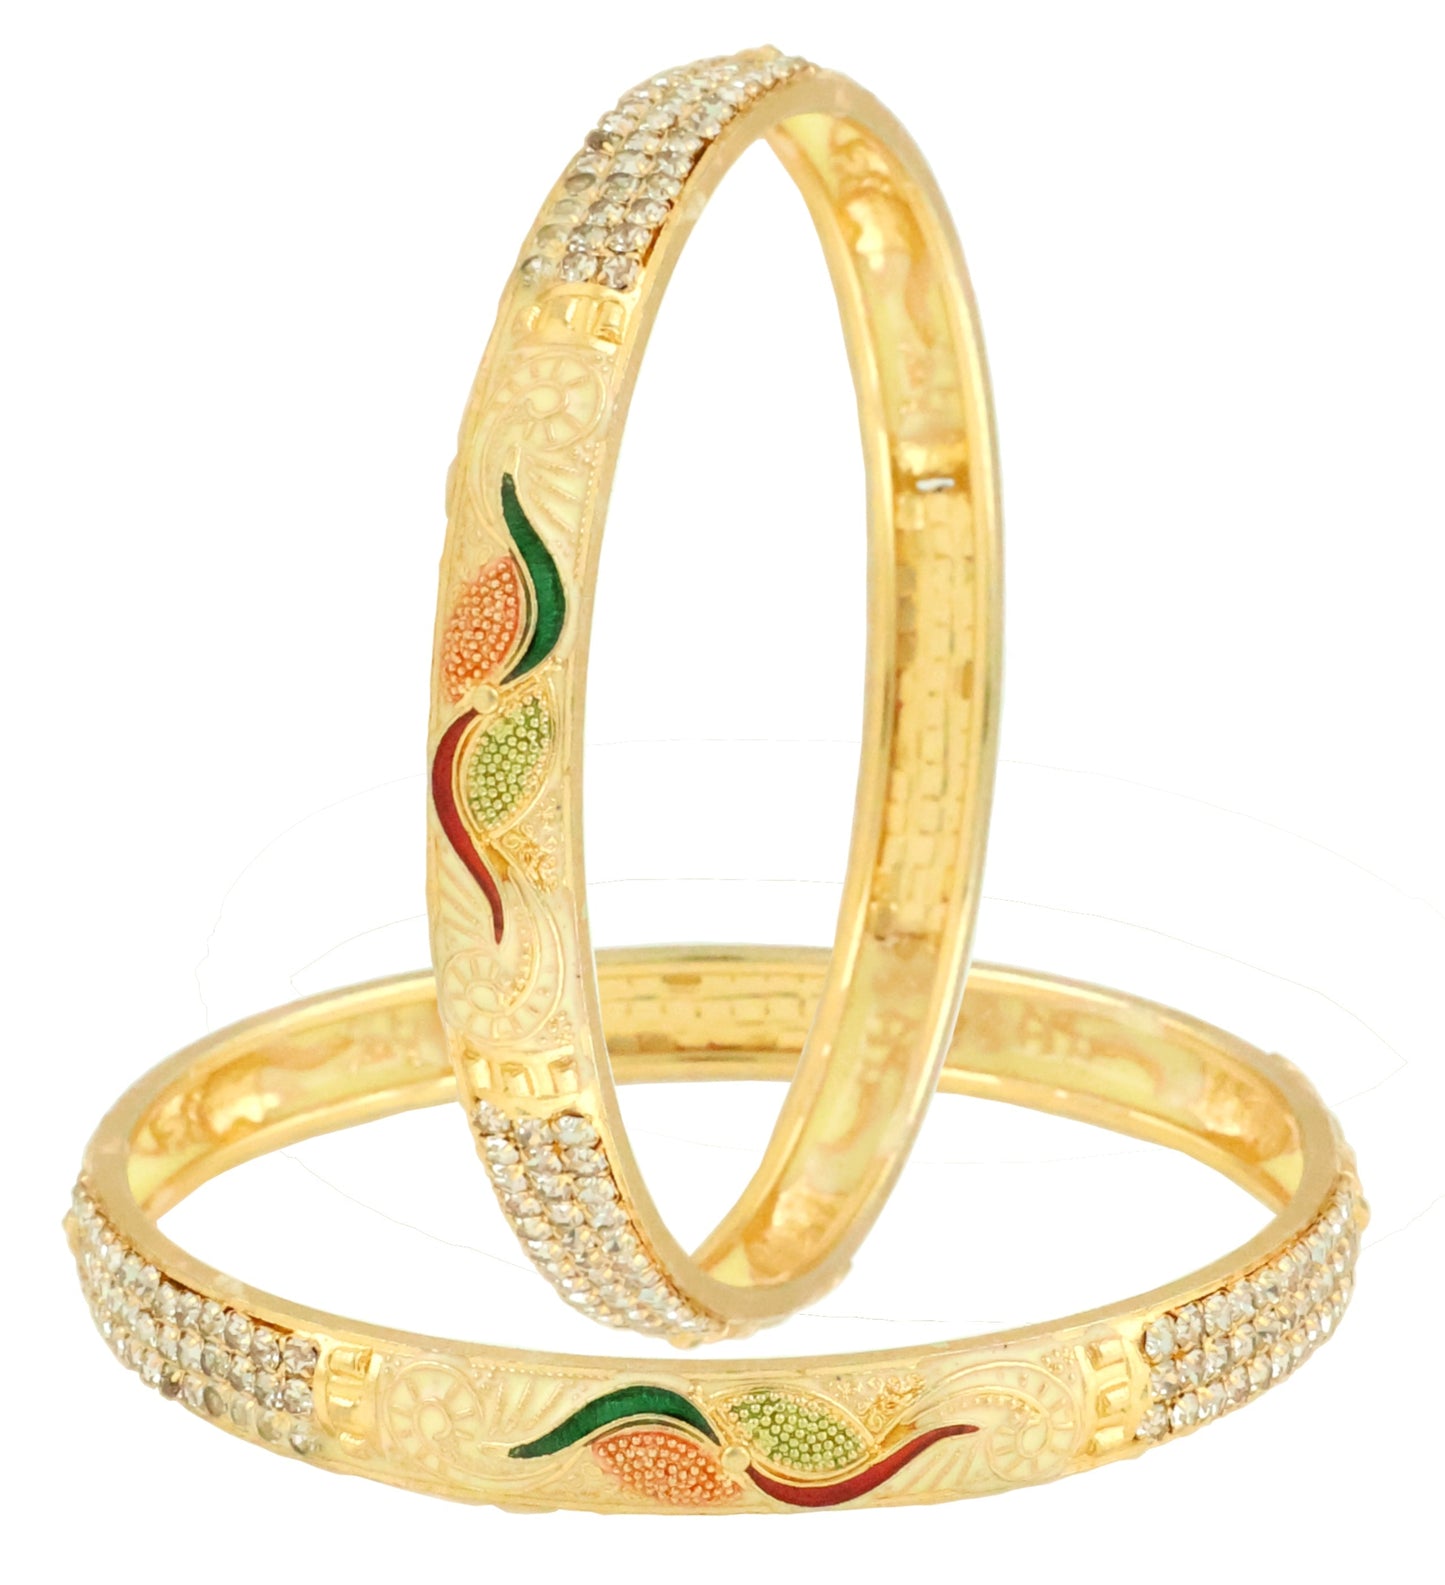 Bhagya Lakshmi Gold Plated for a luxurious look Stunning bangle design High-quality materials 